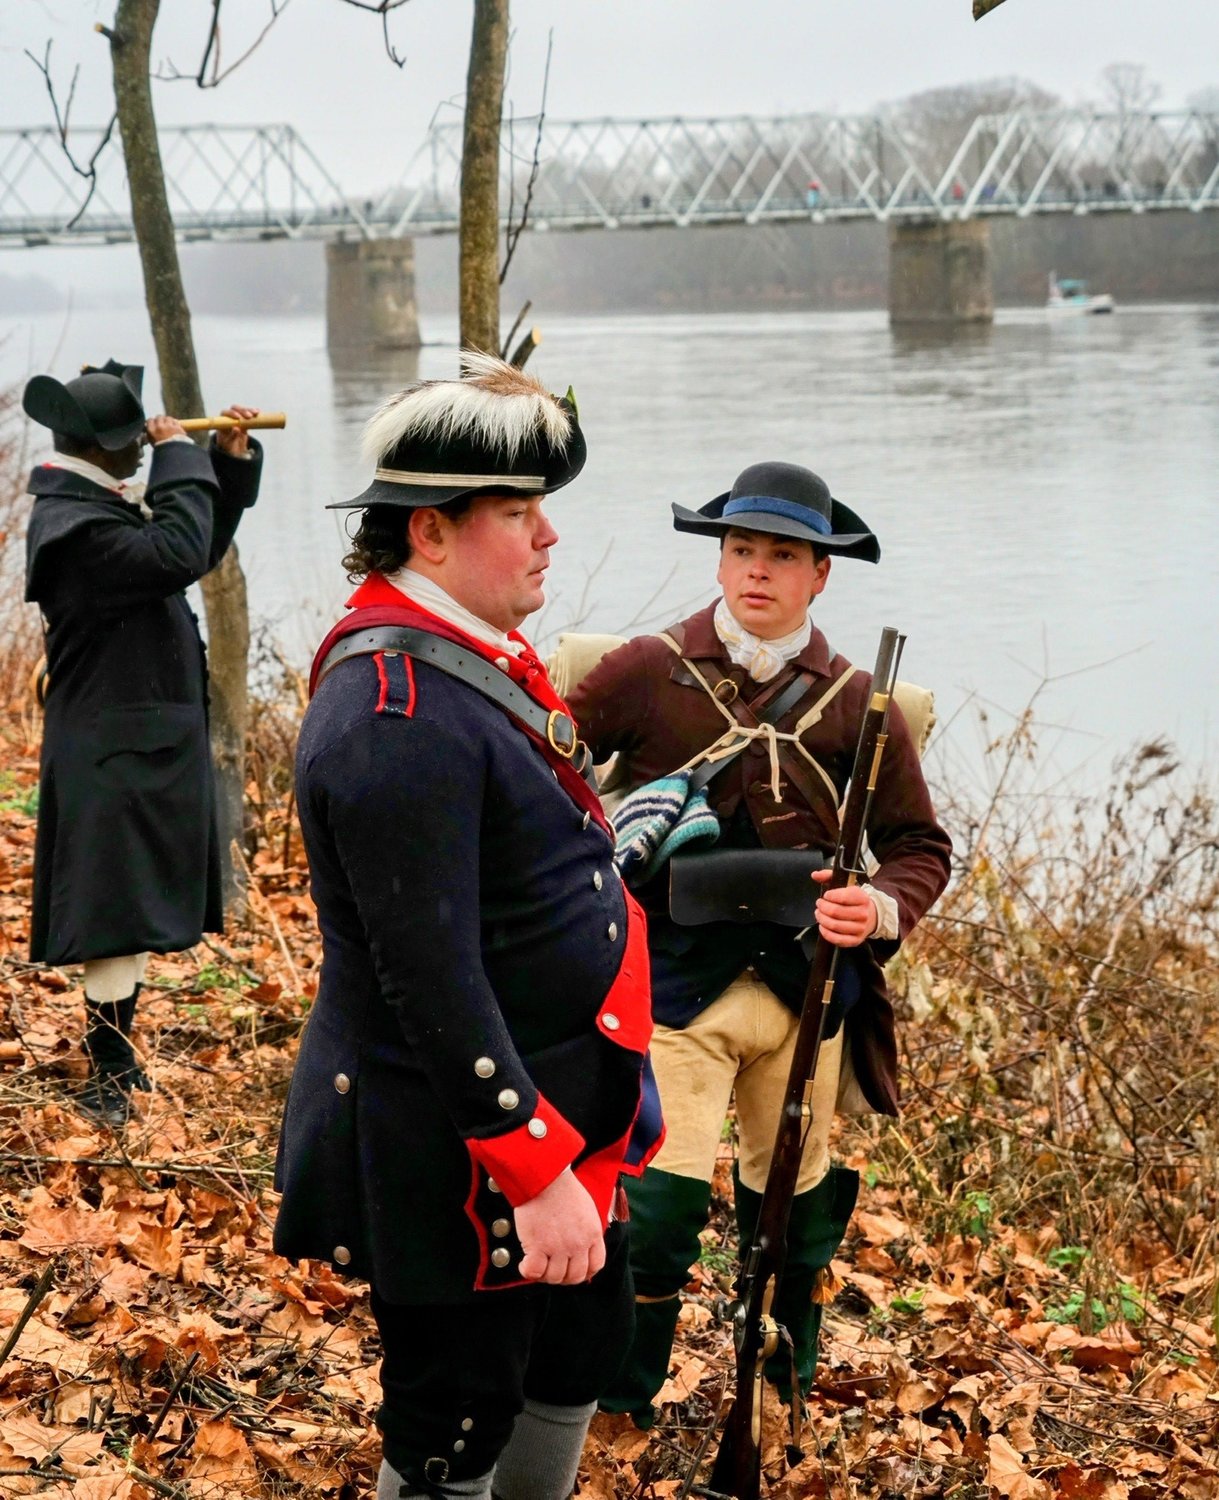 Reenactors gather at the bank of the Delaware River.